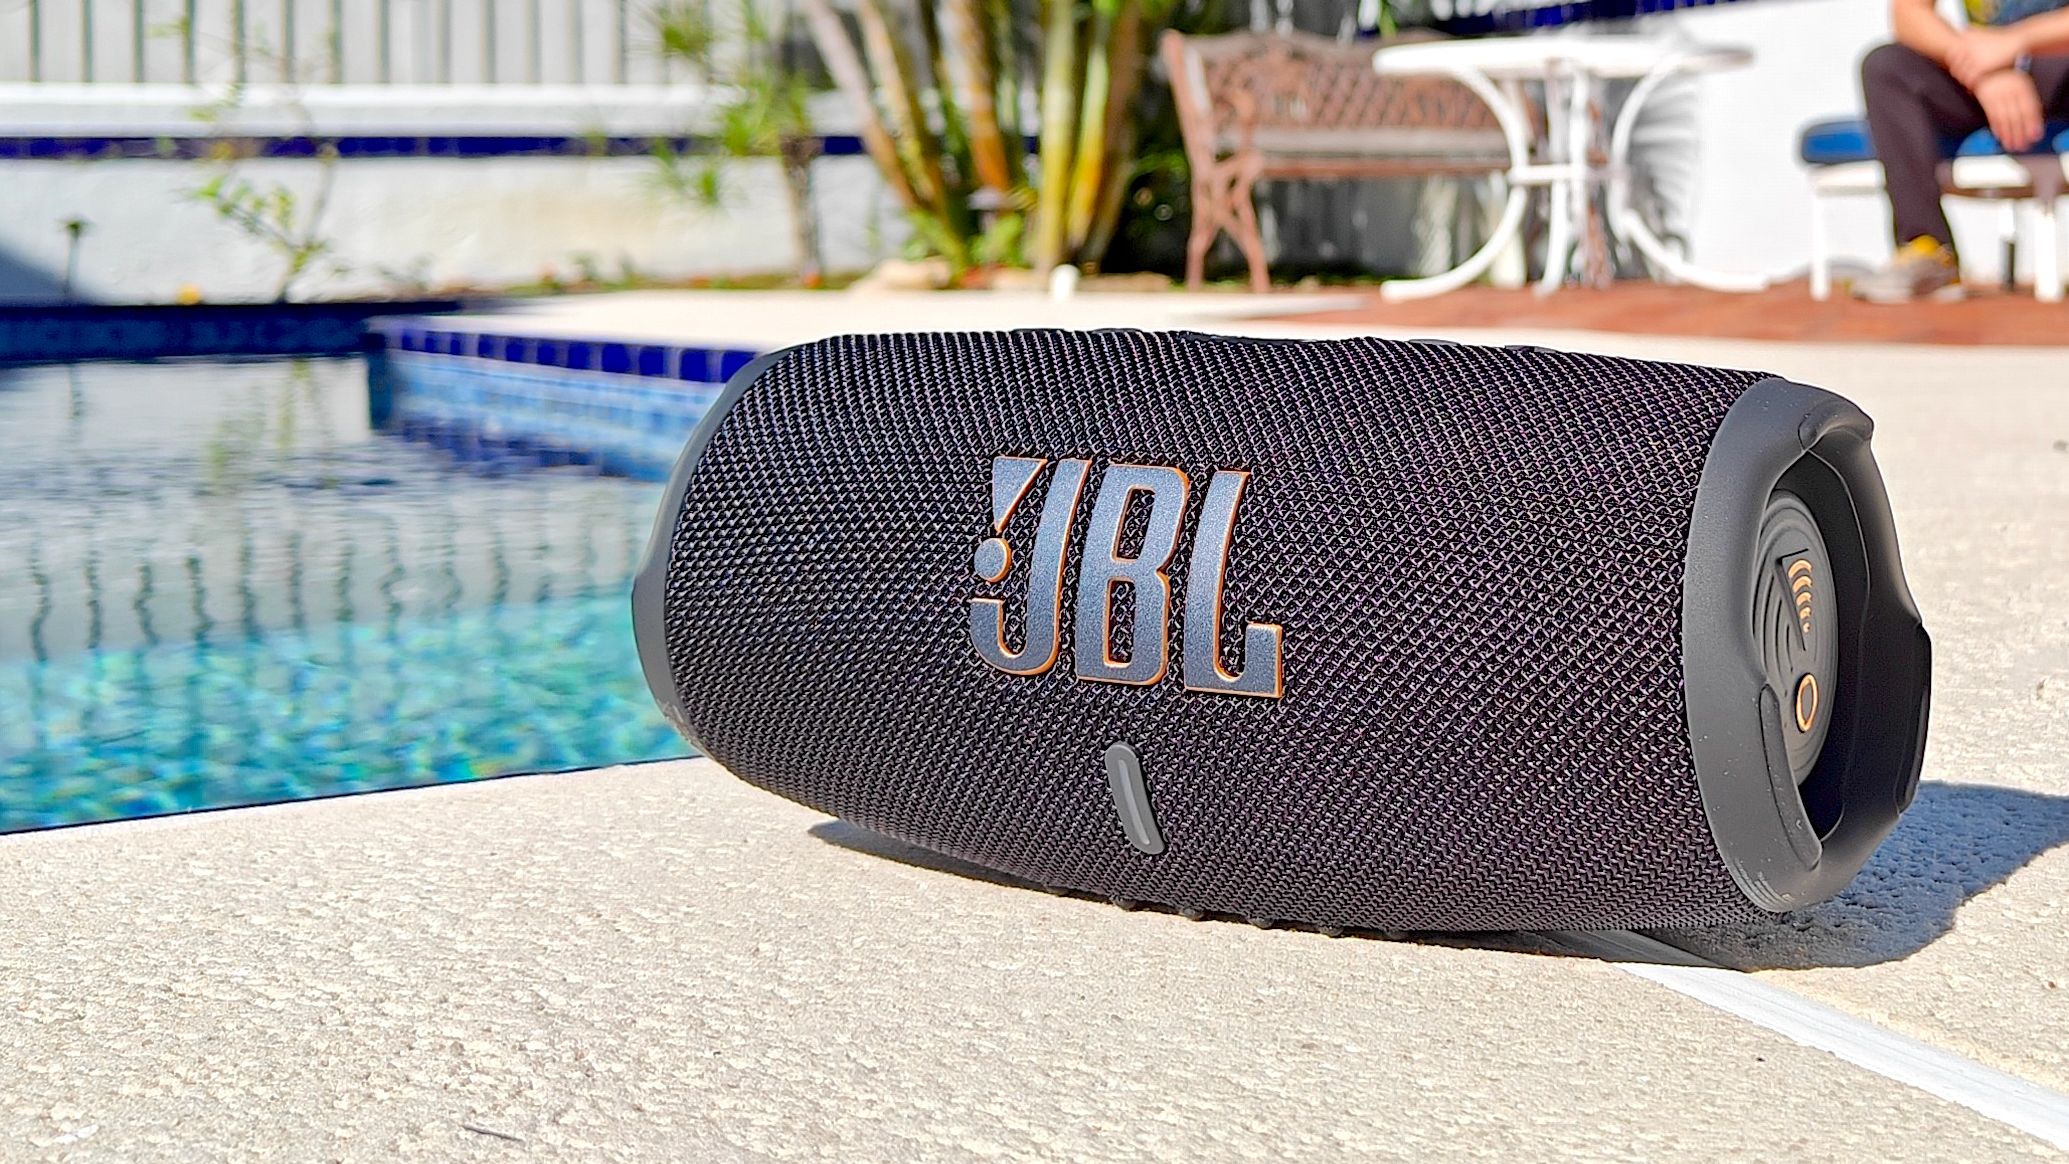 The JBL Charge 5 speaker is $120 for  Prime Day